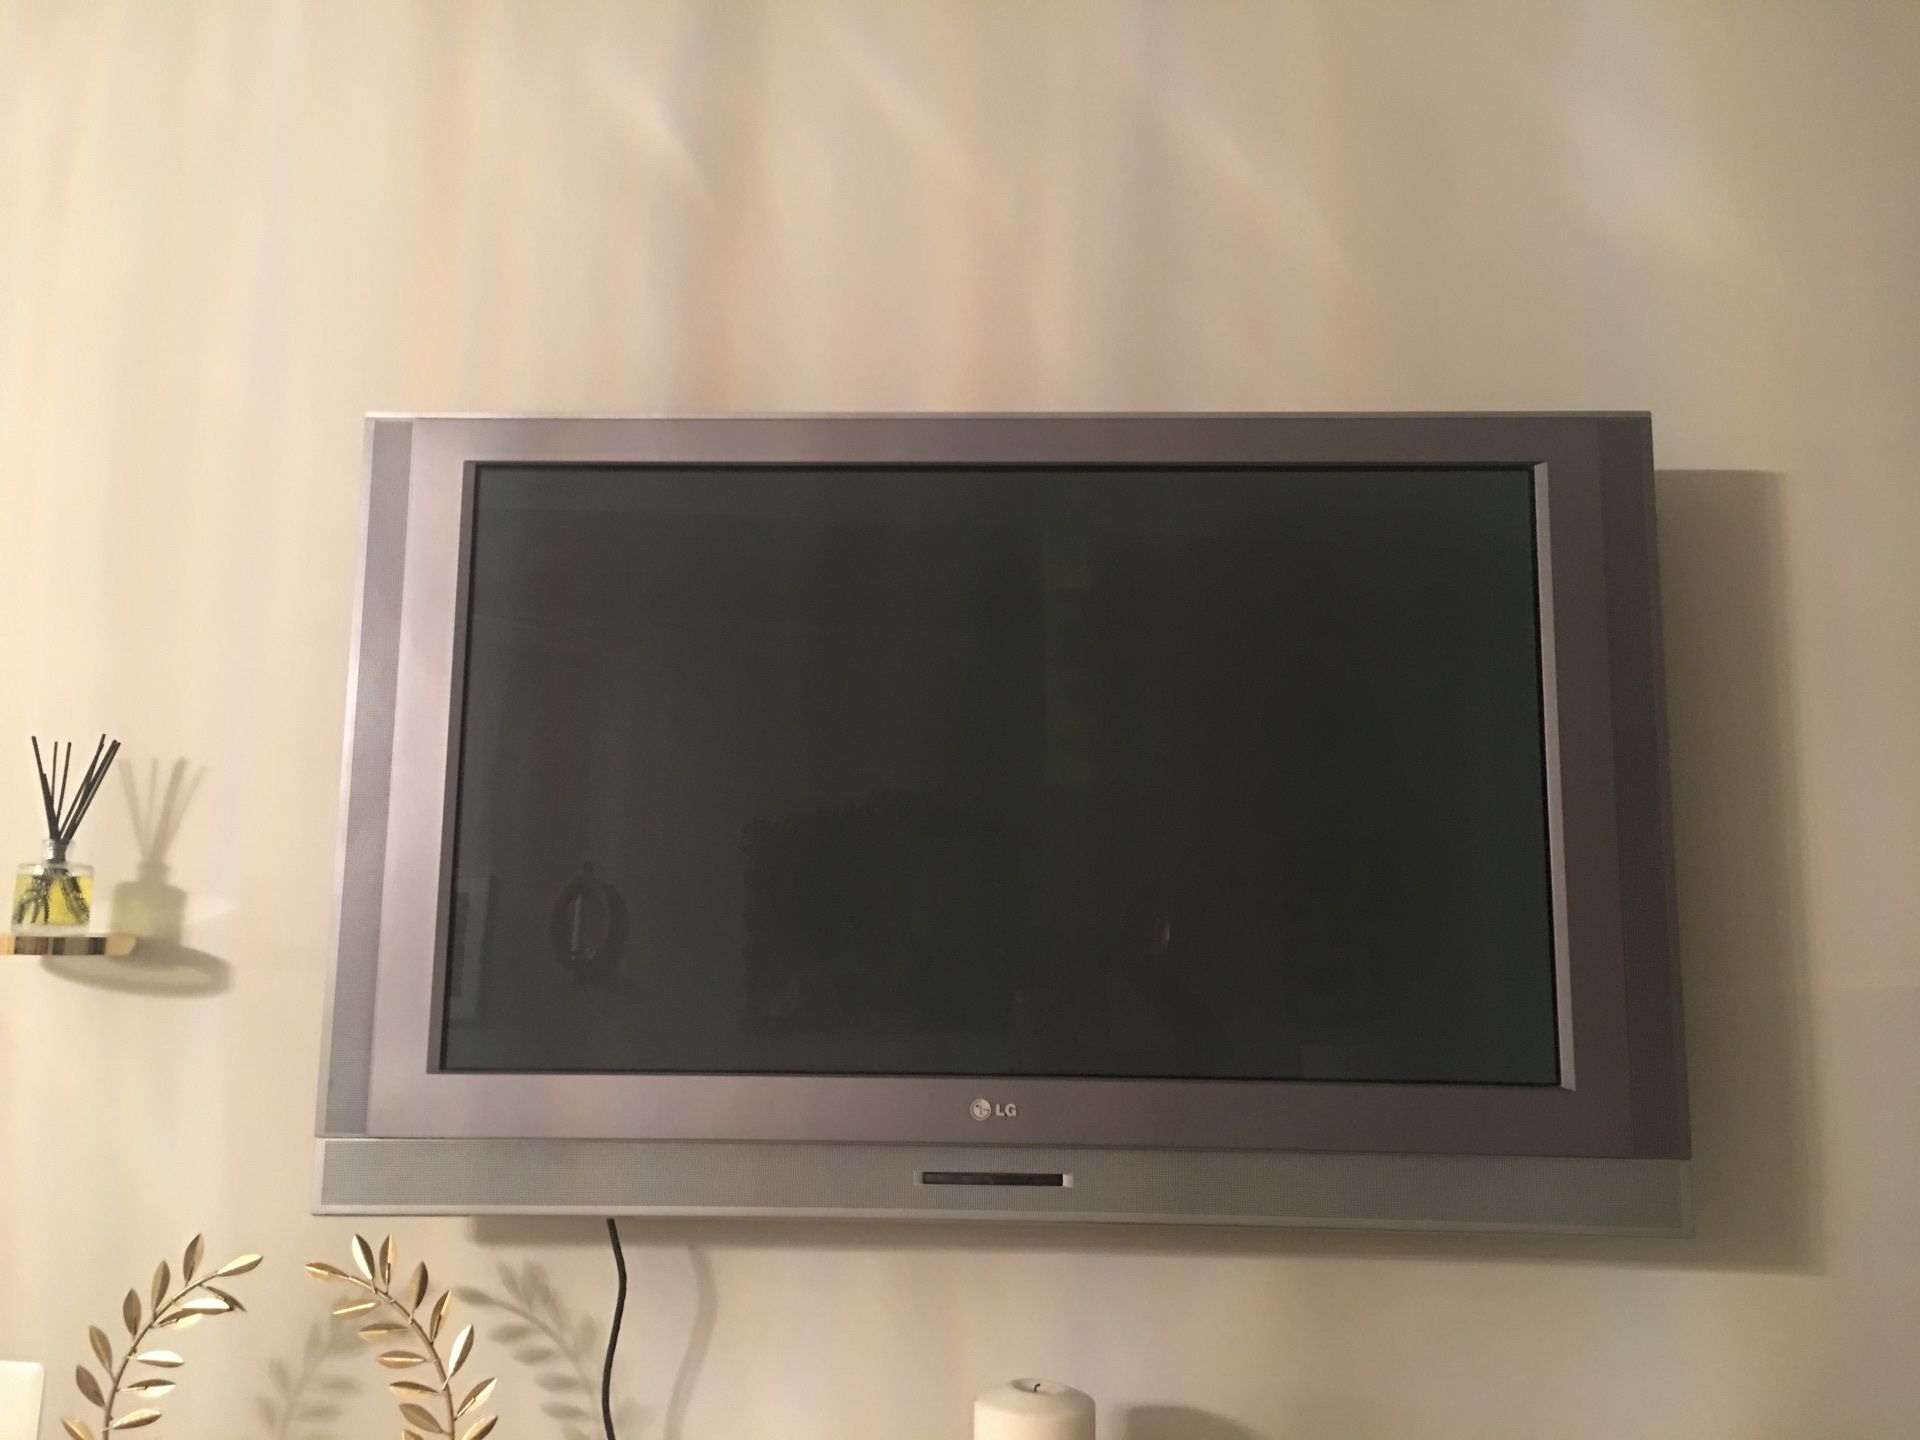 LG flat screen TV with remotes 44.5 x 27 inches